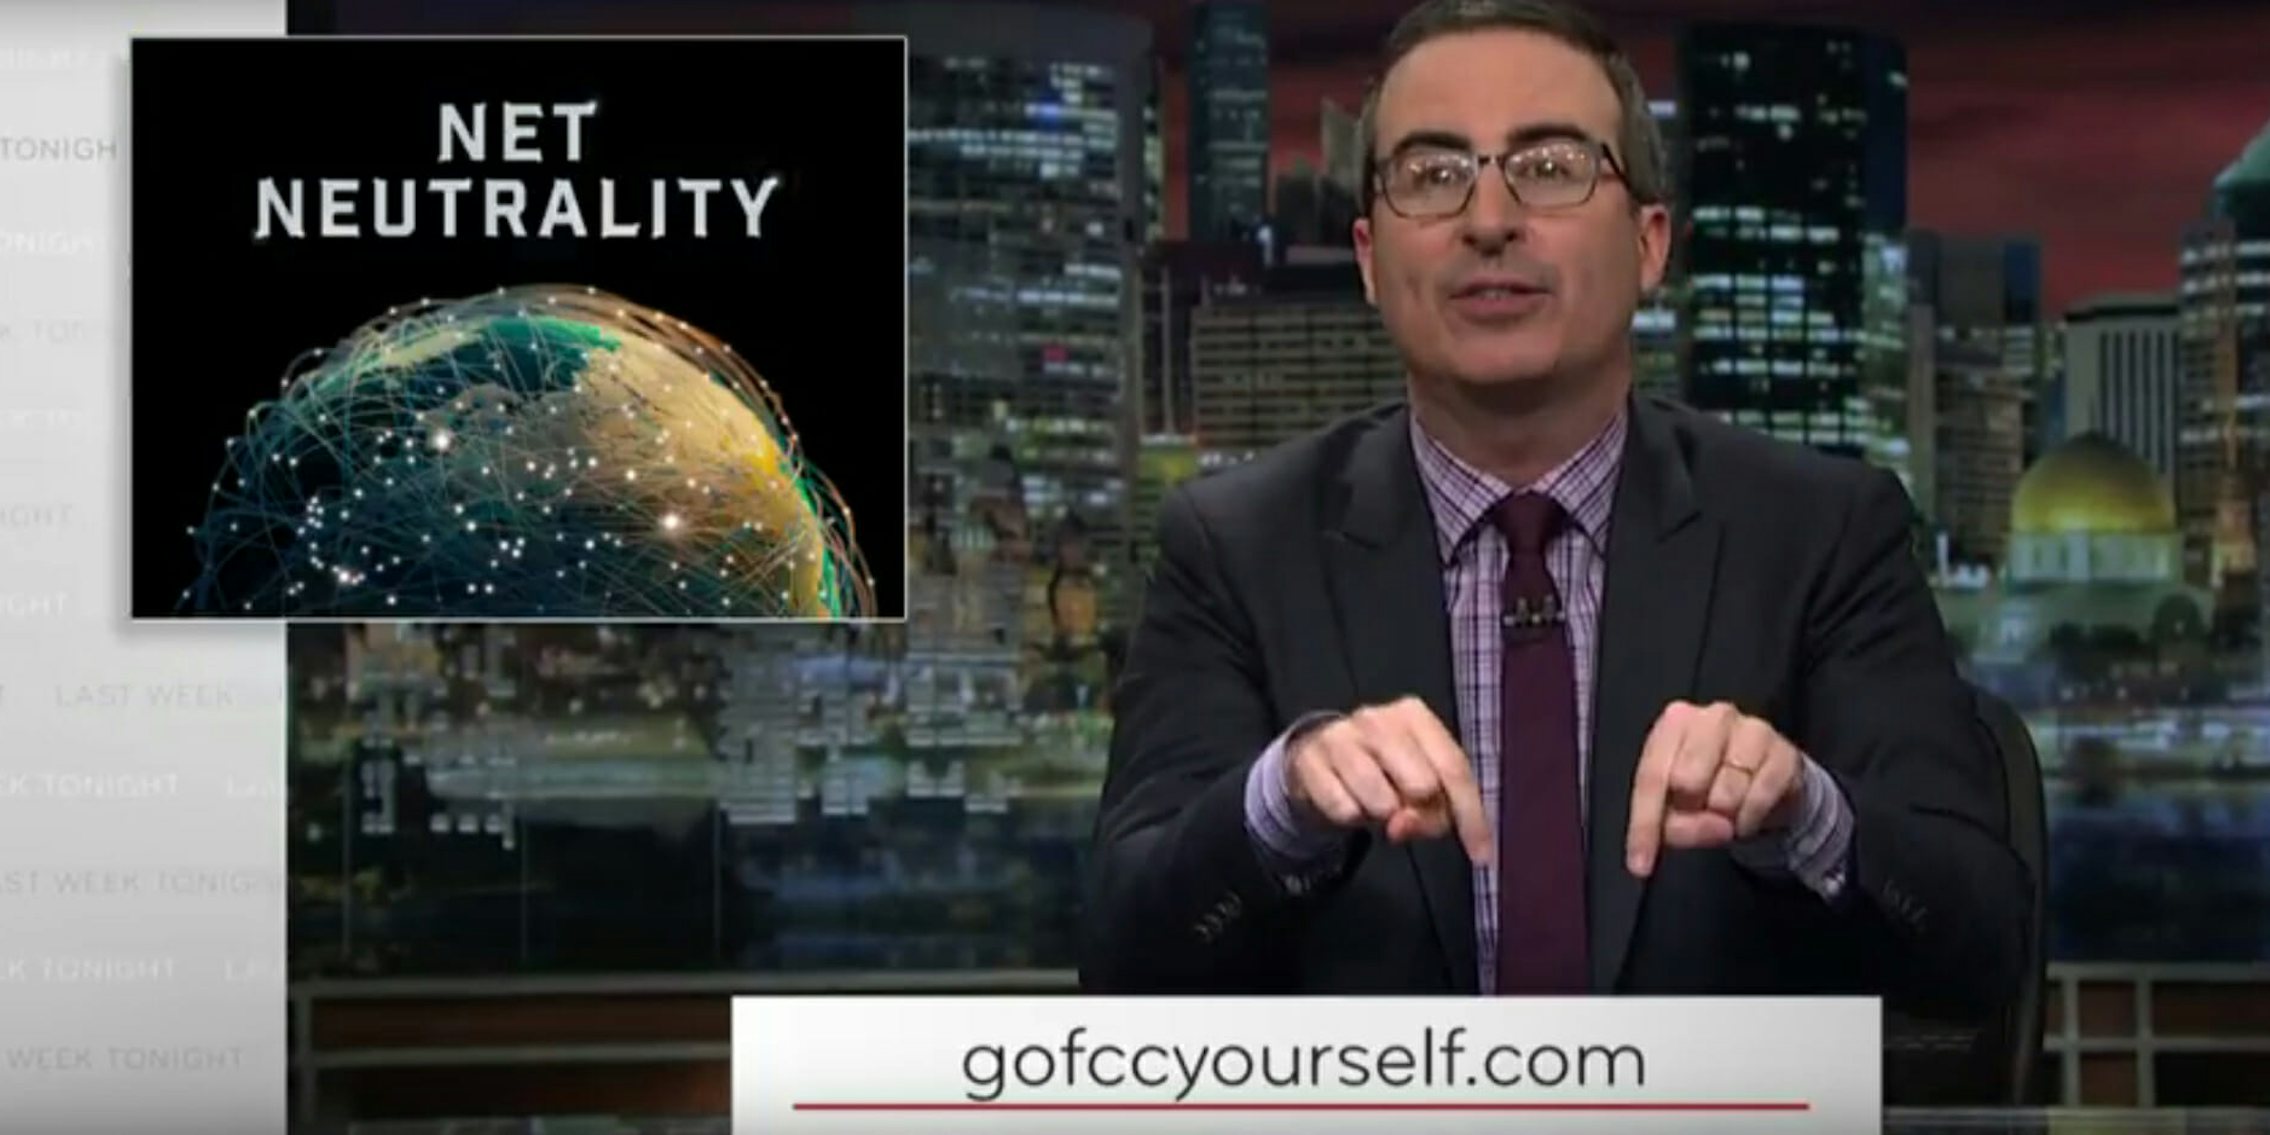 John Oliver is rallying the internet to save Net Neutrality - again.